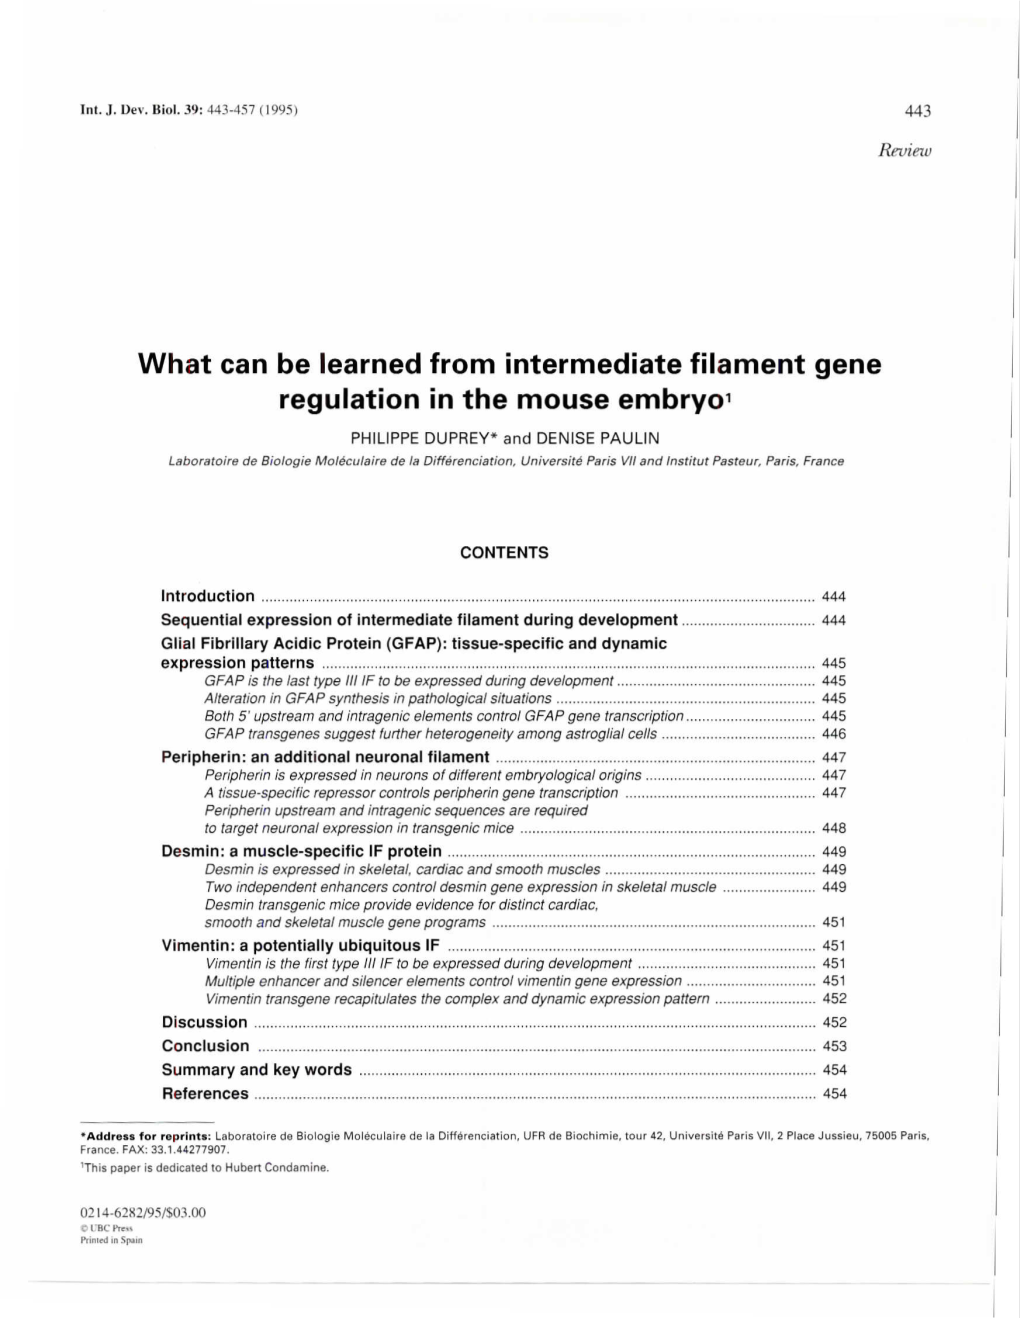 What Can Be Learned from Intermediate Filament Gene